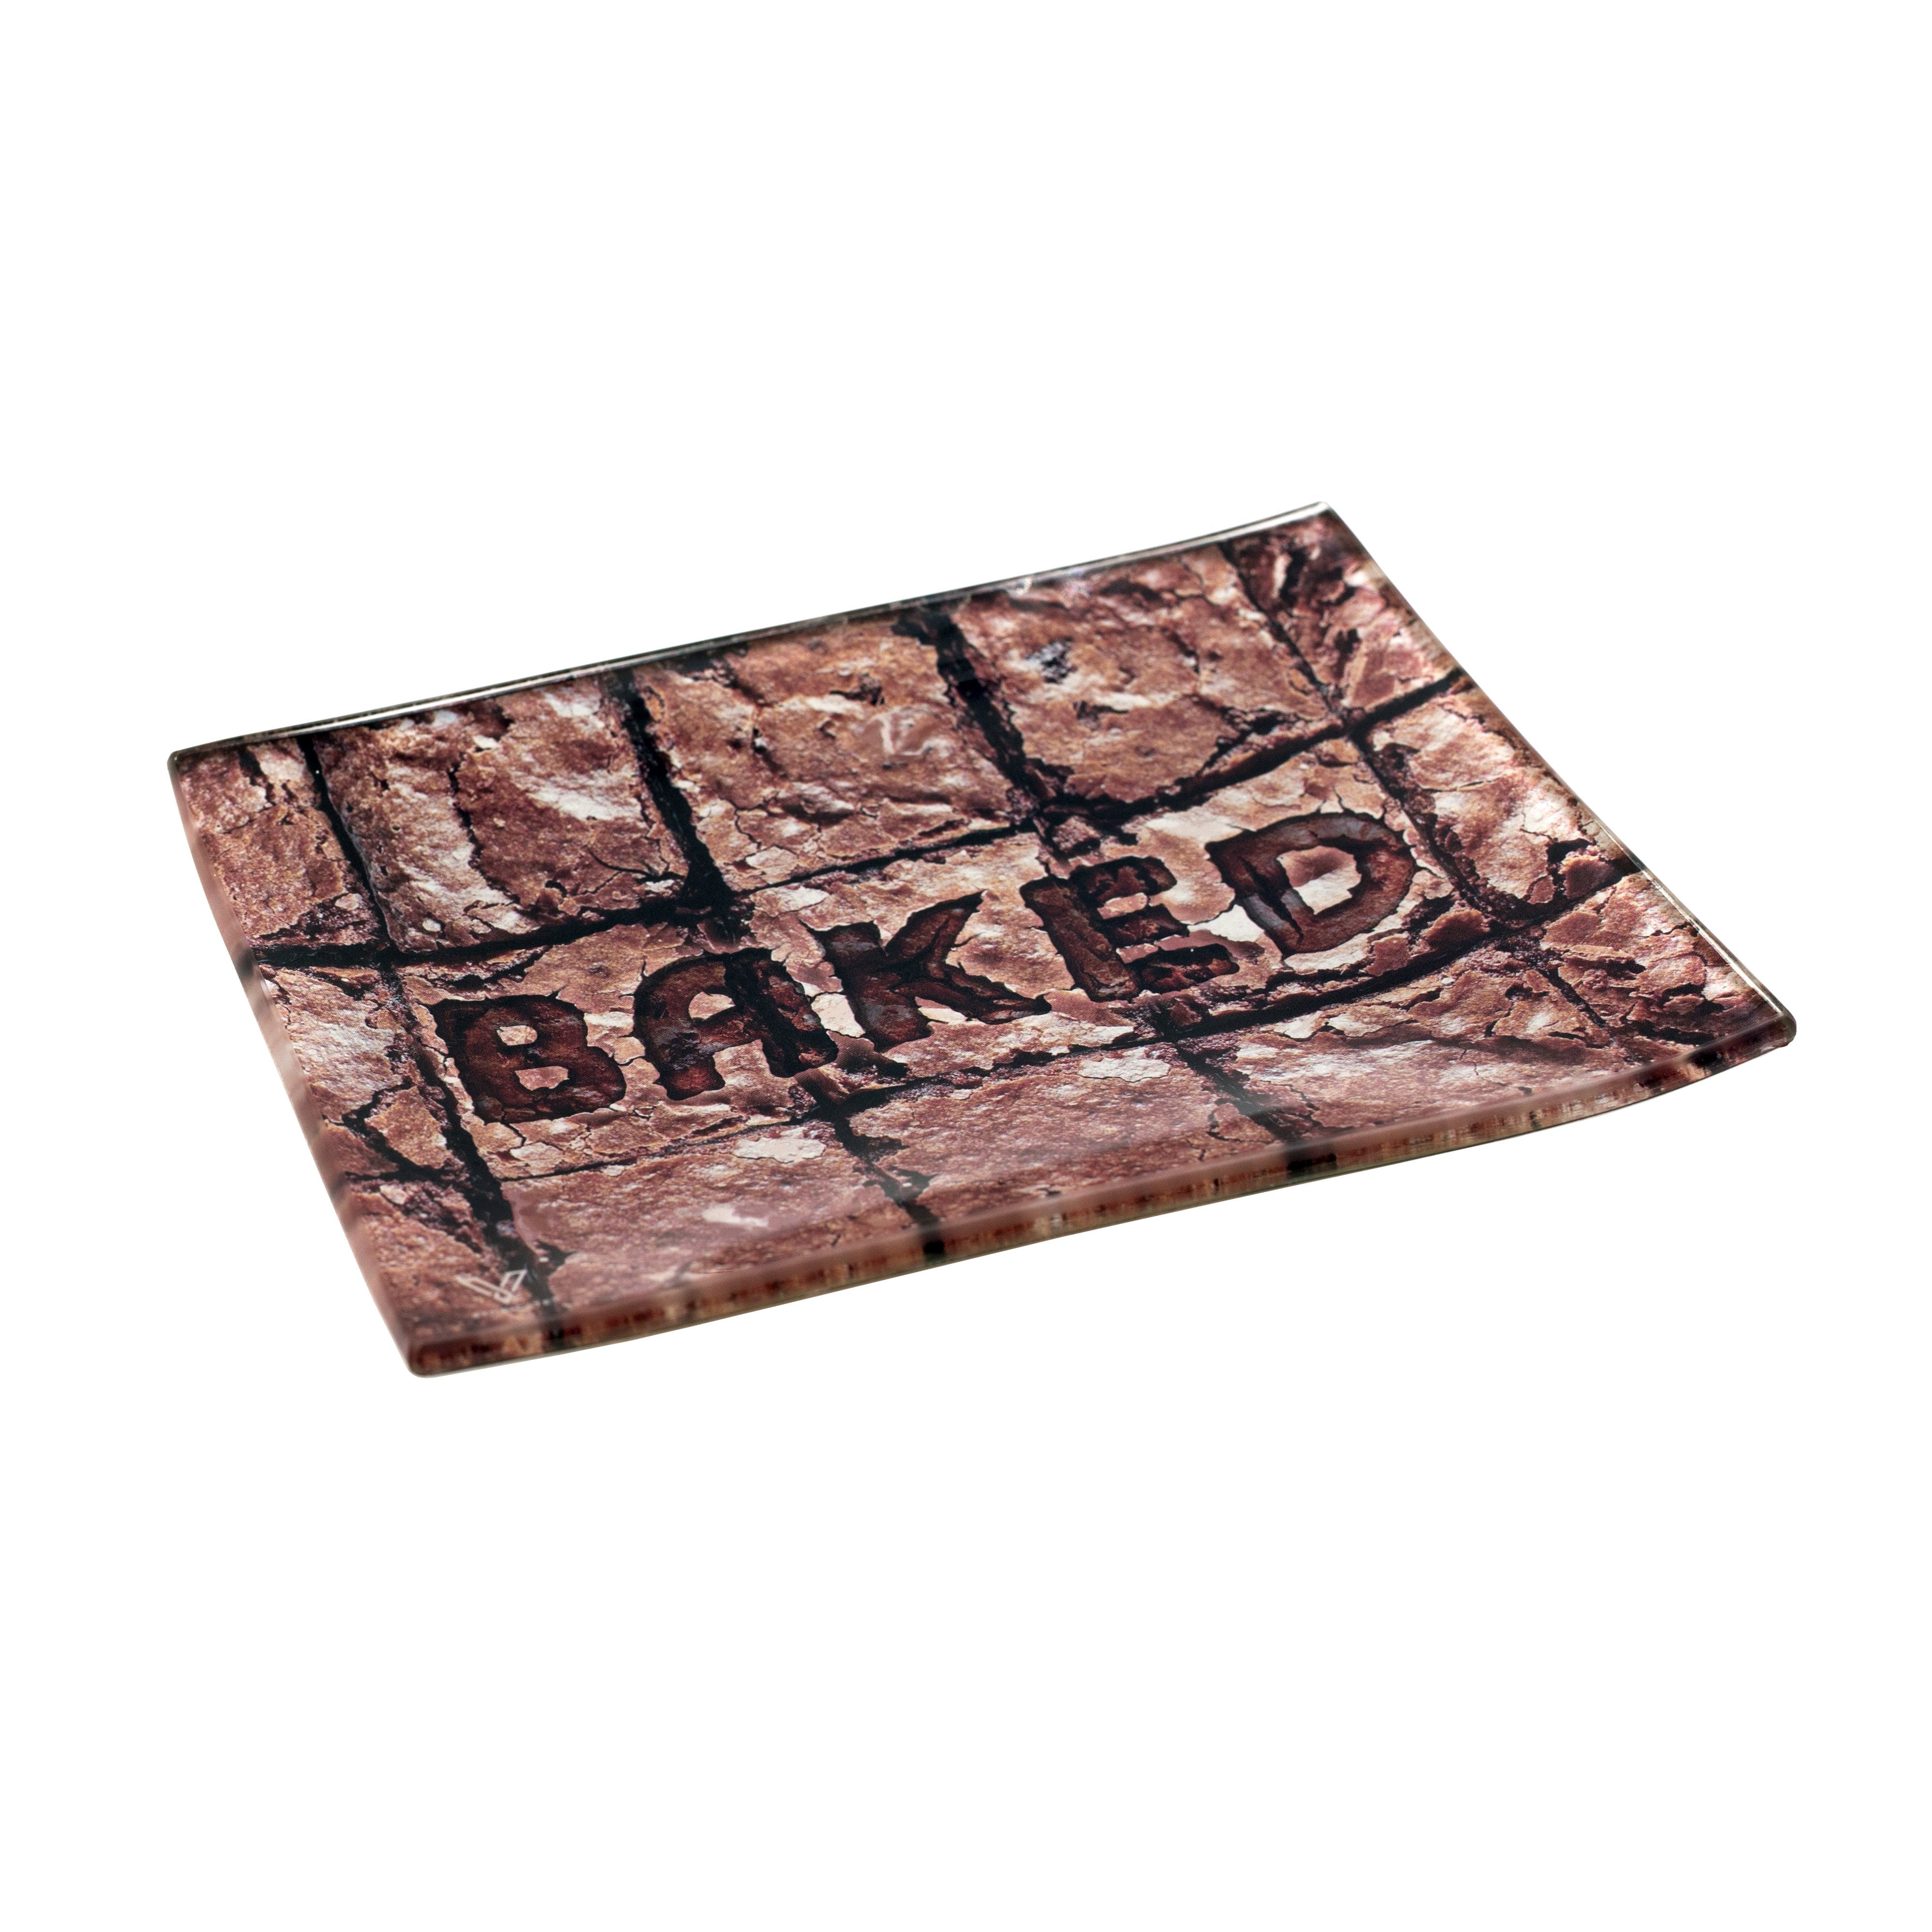 V-SYNDICATE | Baked Brownies Rolling Tray | 6.5in x 5in - Small - Glass - 1